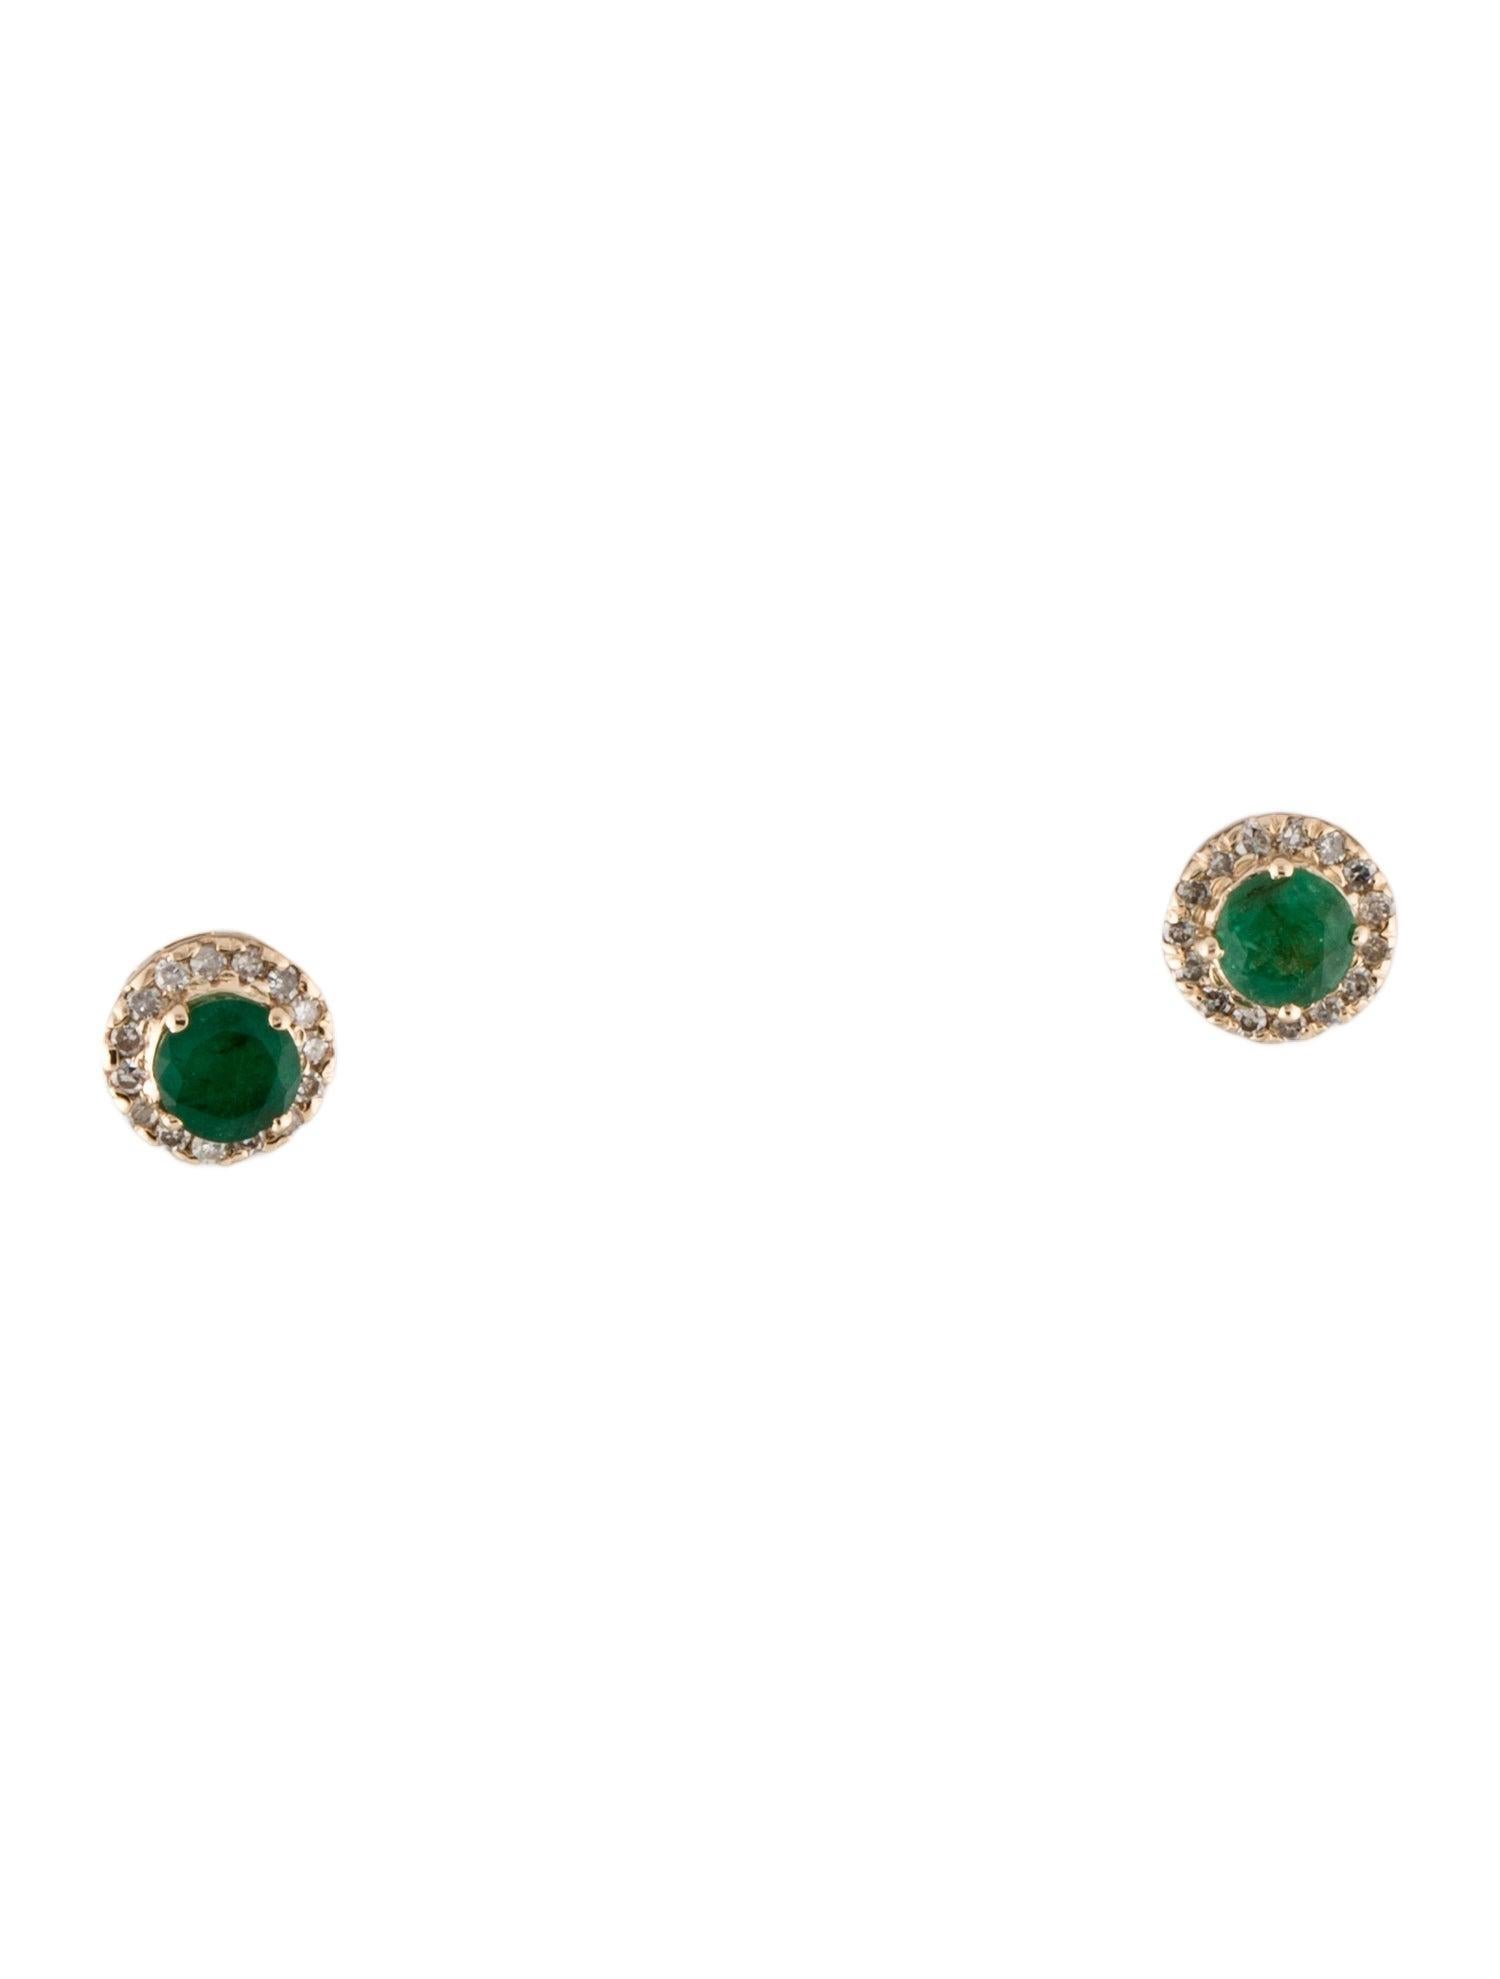 Discover the allure of these meticulously crafted 14K Yellow Gold Stud Earrings, each adorned with a 0.37 Carat Round Modified Brilliant Emerald, complemented by an ensemble of 0.12 Carat Near Colorless Diamonds. These earrings, embodying